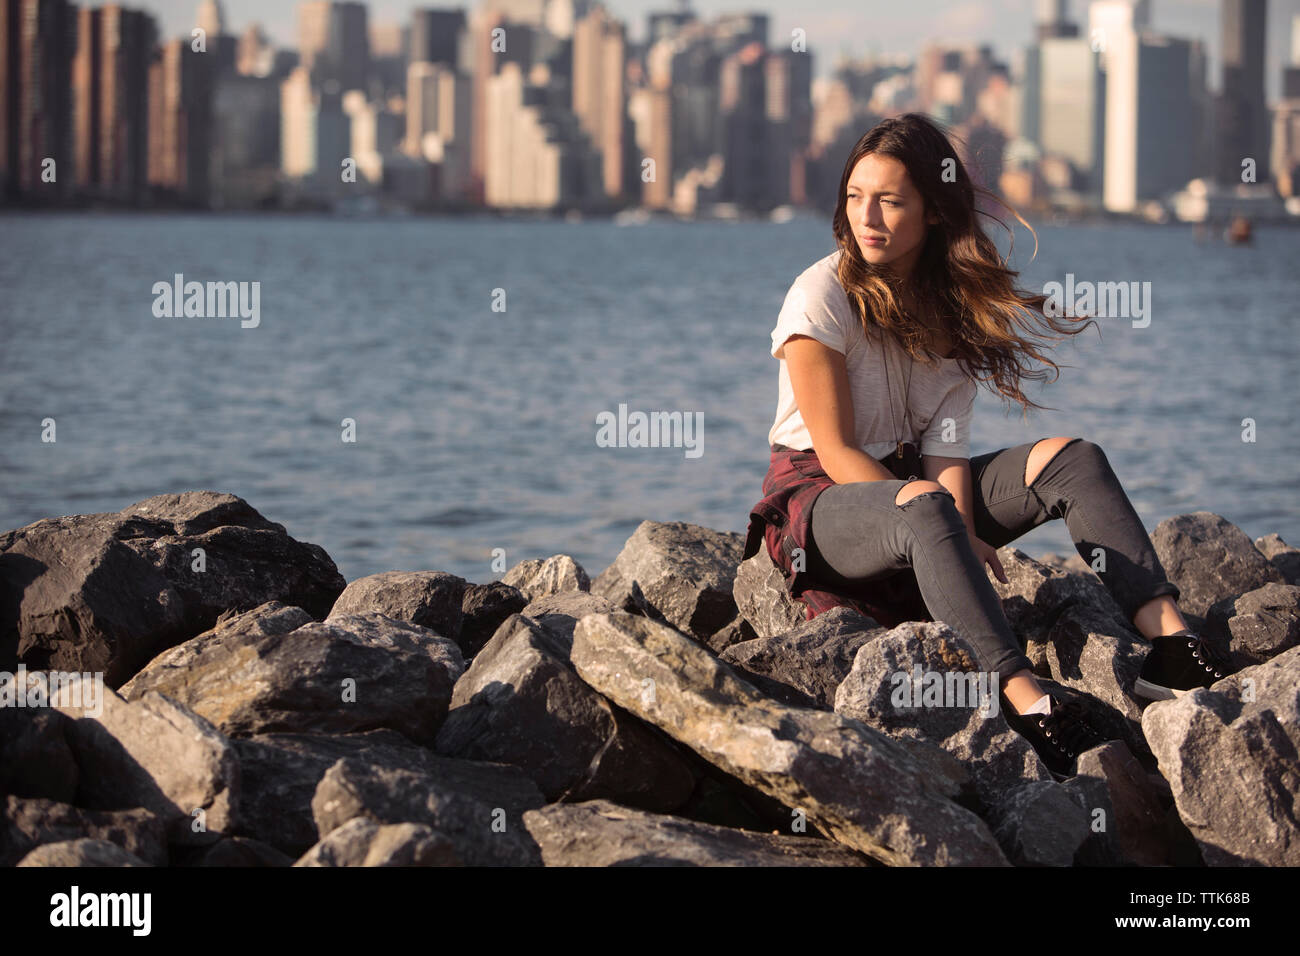 Thoughtful woman sitting on rocks par beach Banque D'Images